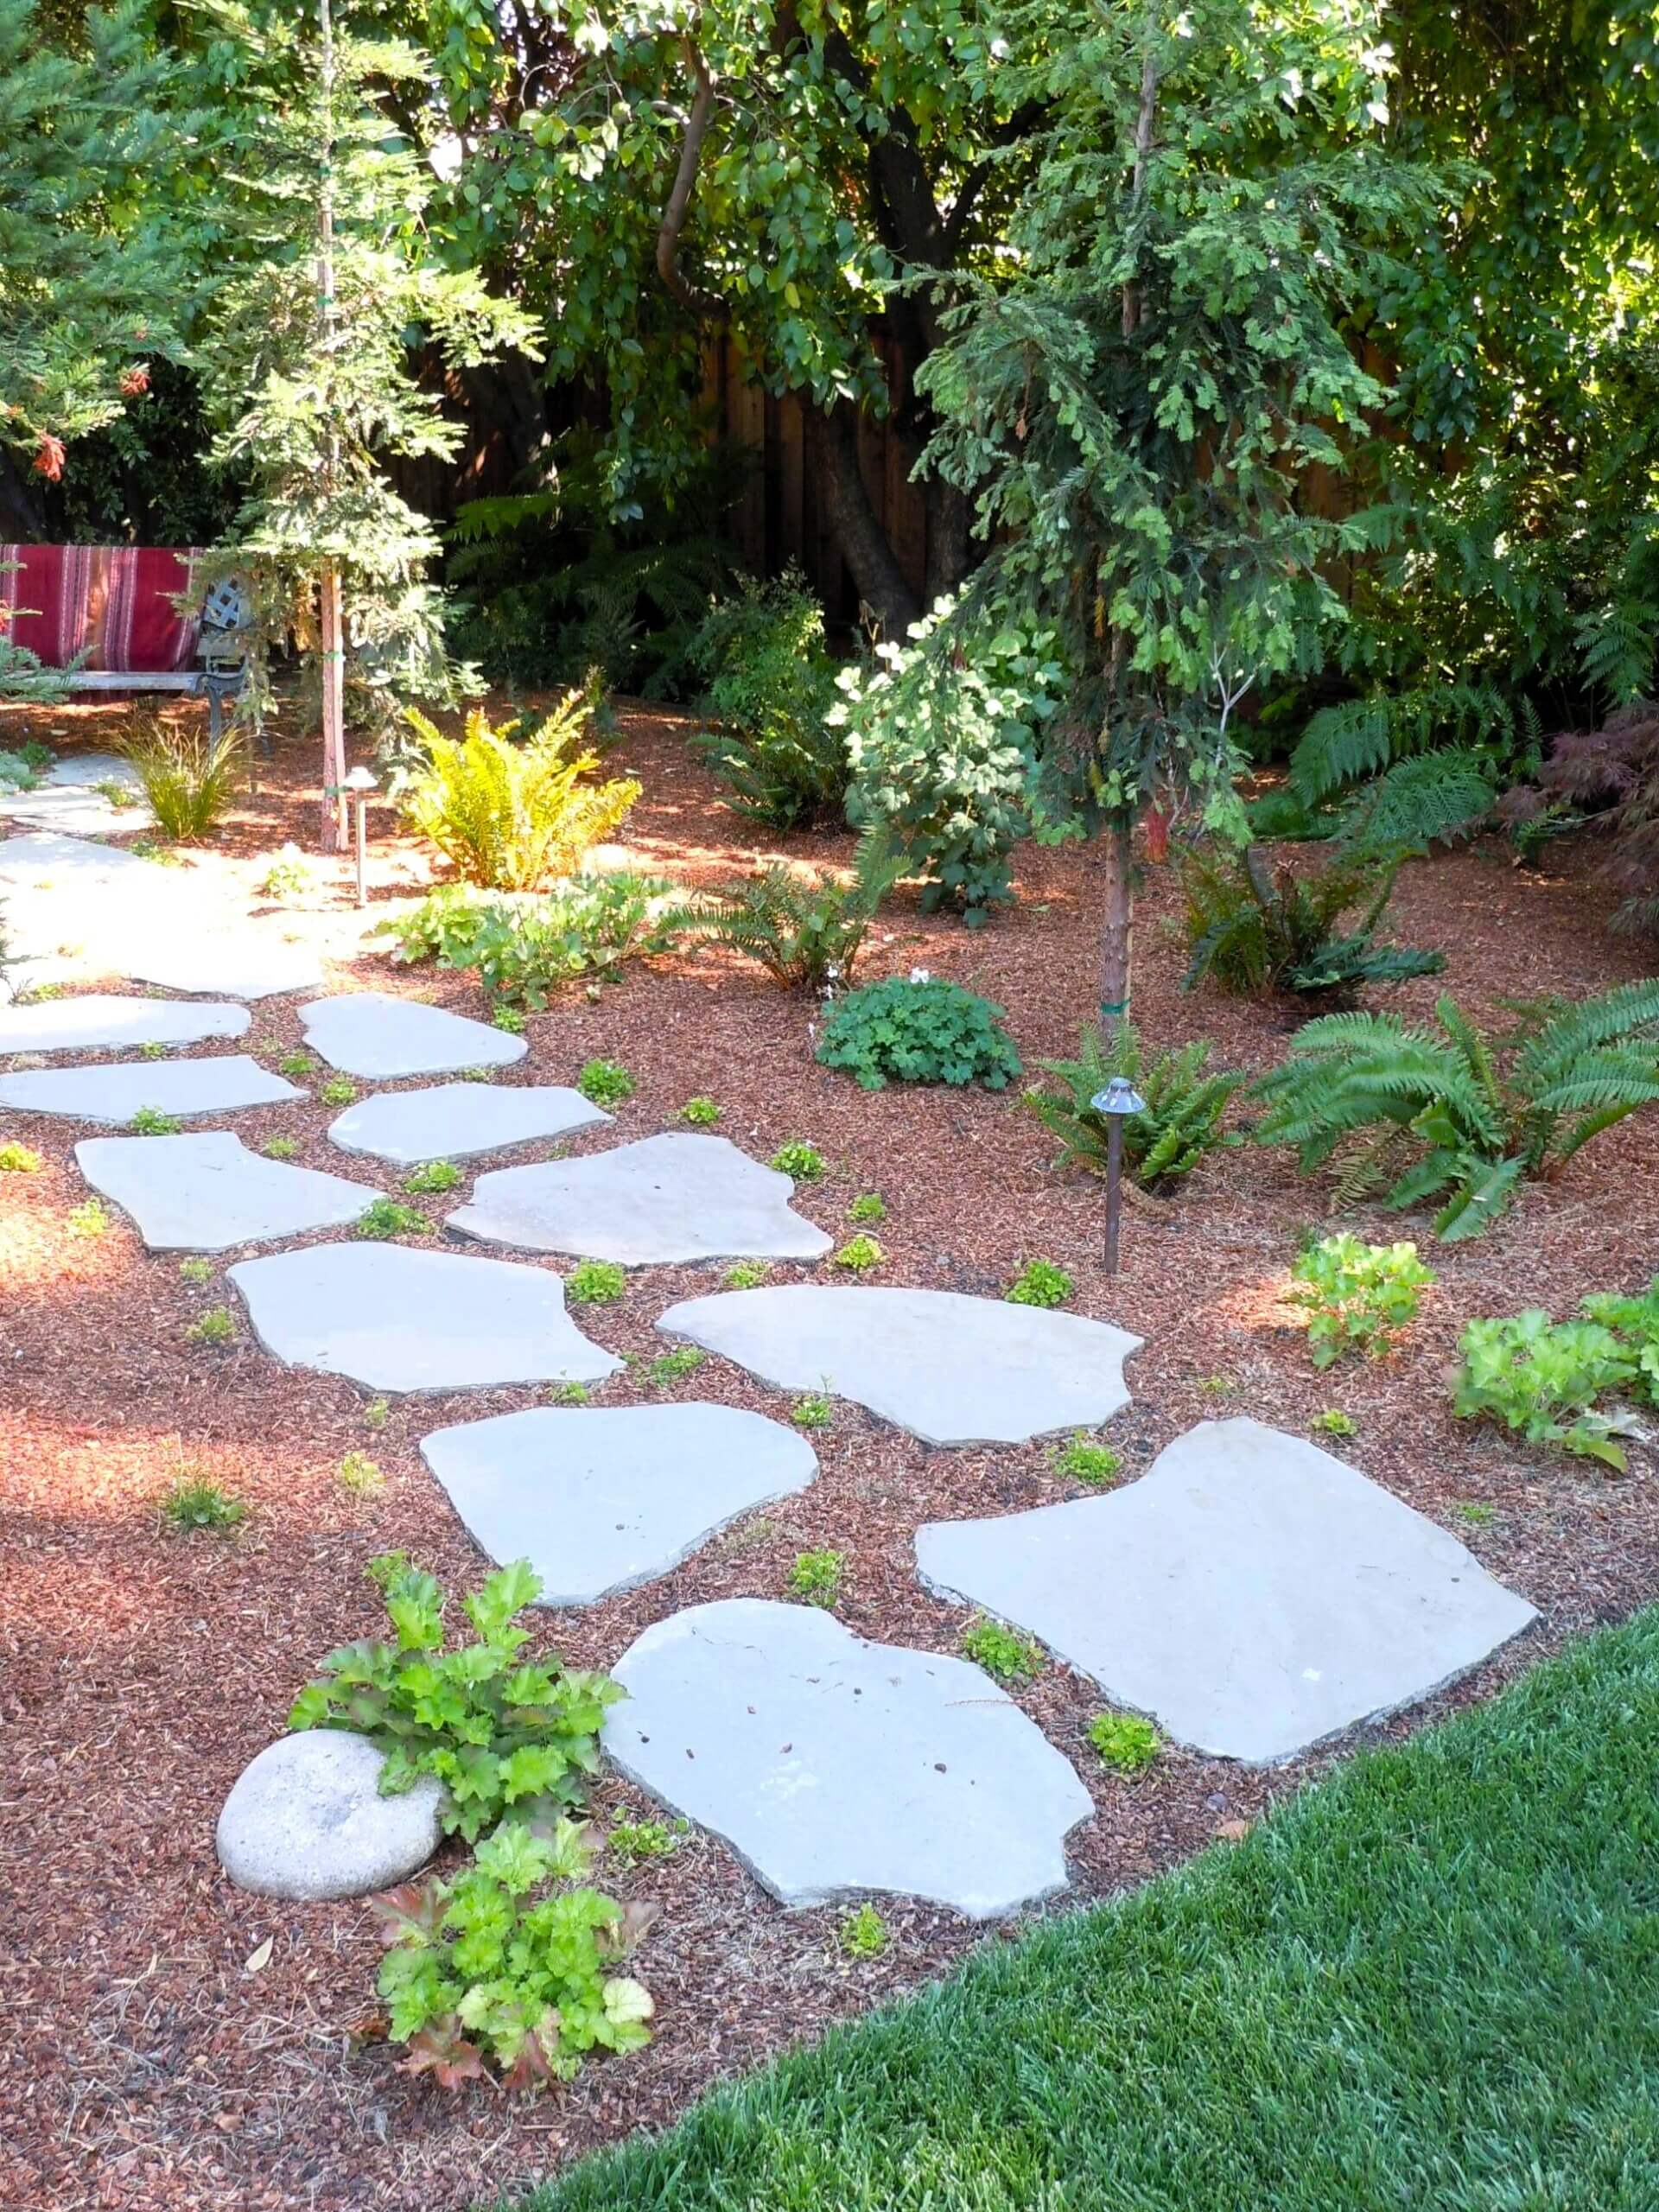 Natural sotne pavers in a wooded California backyard with manicured landscaping